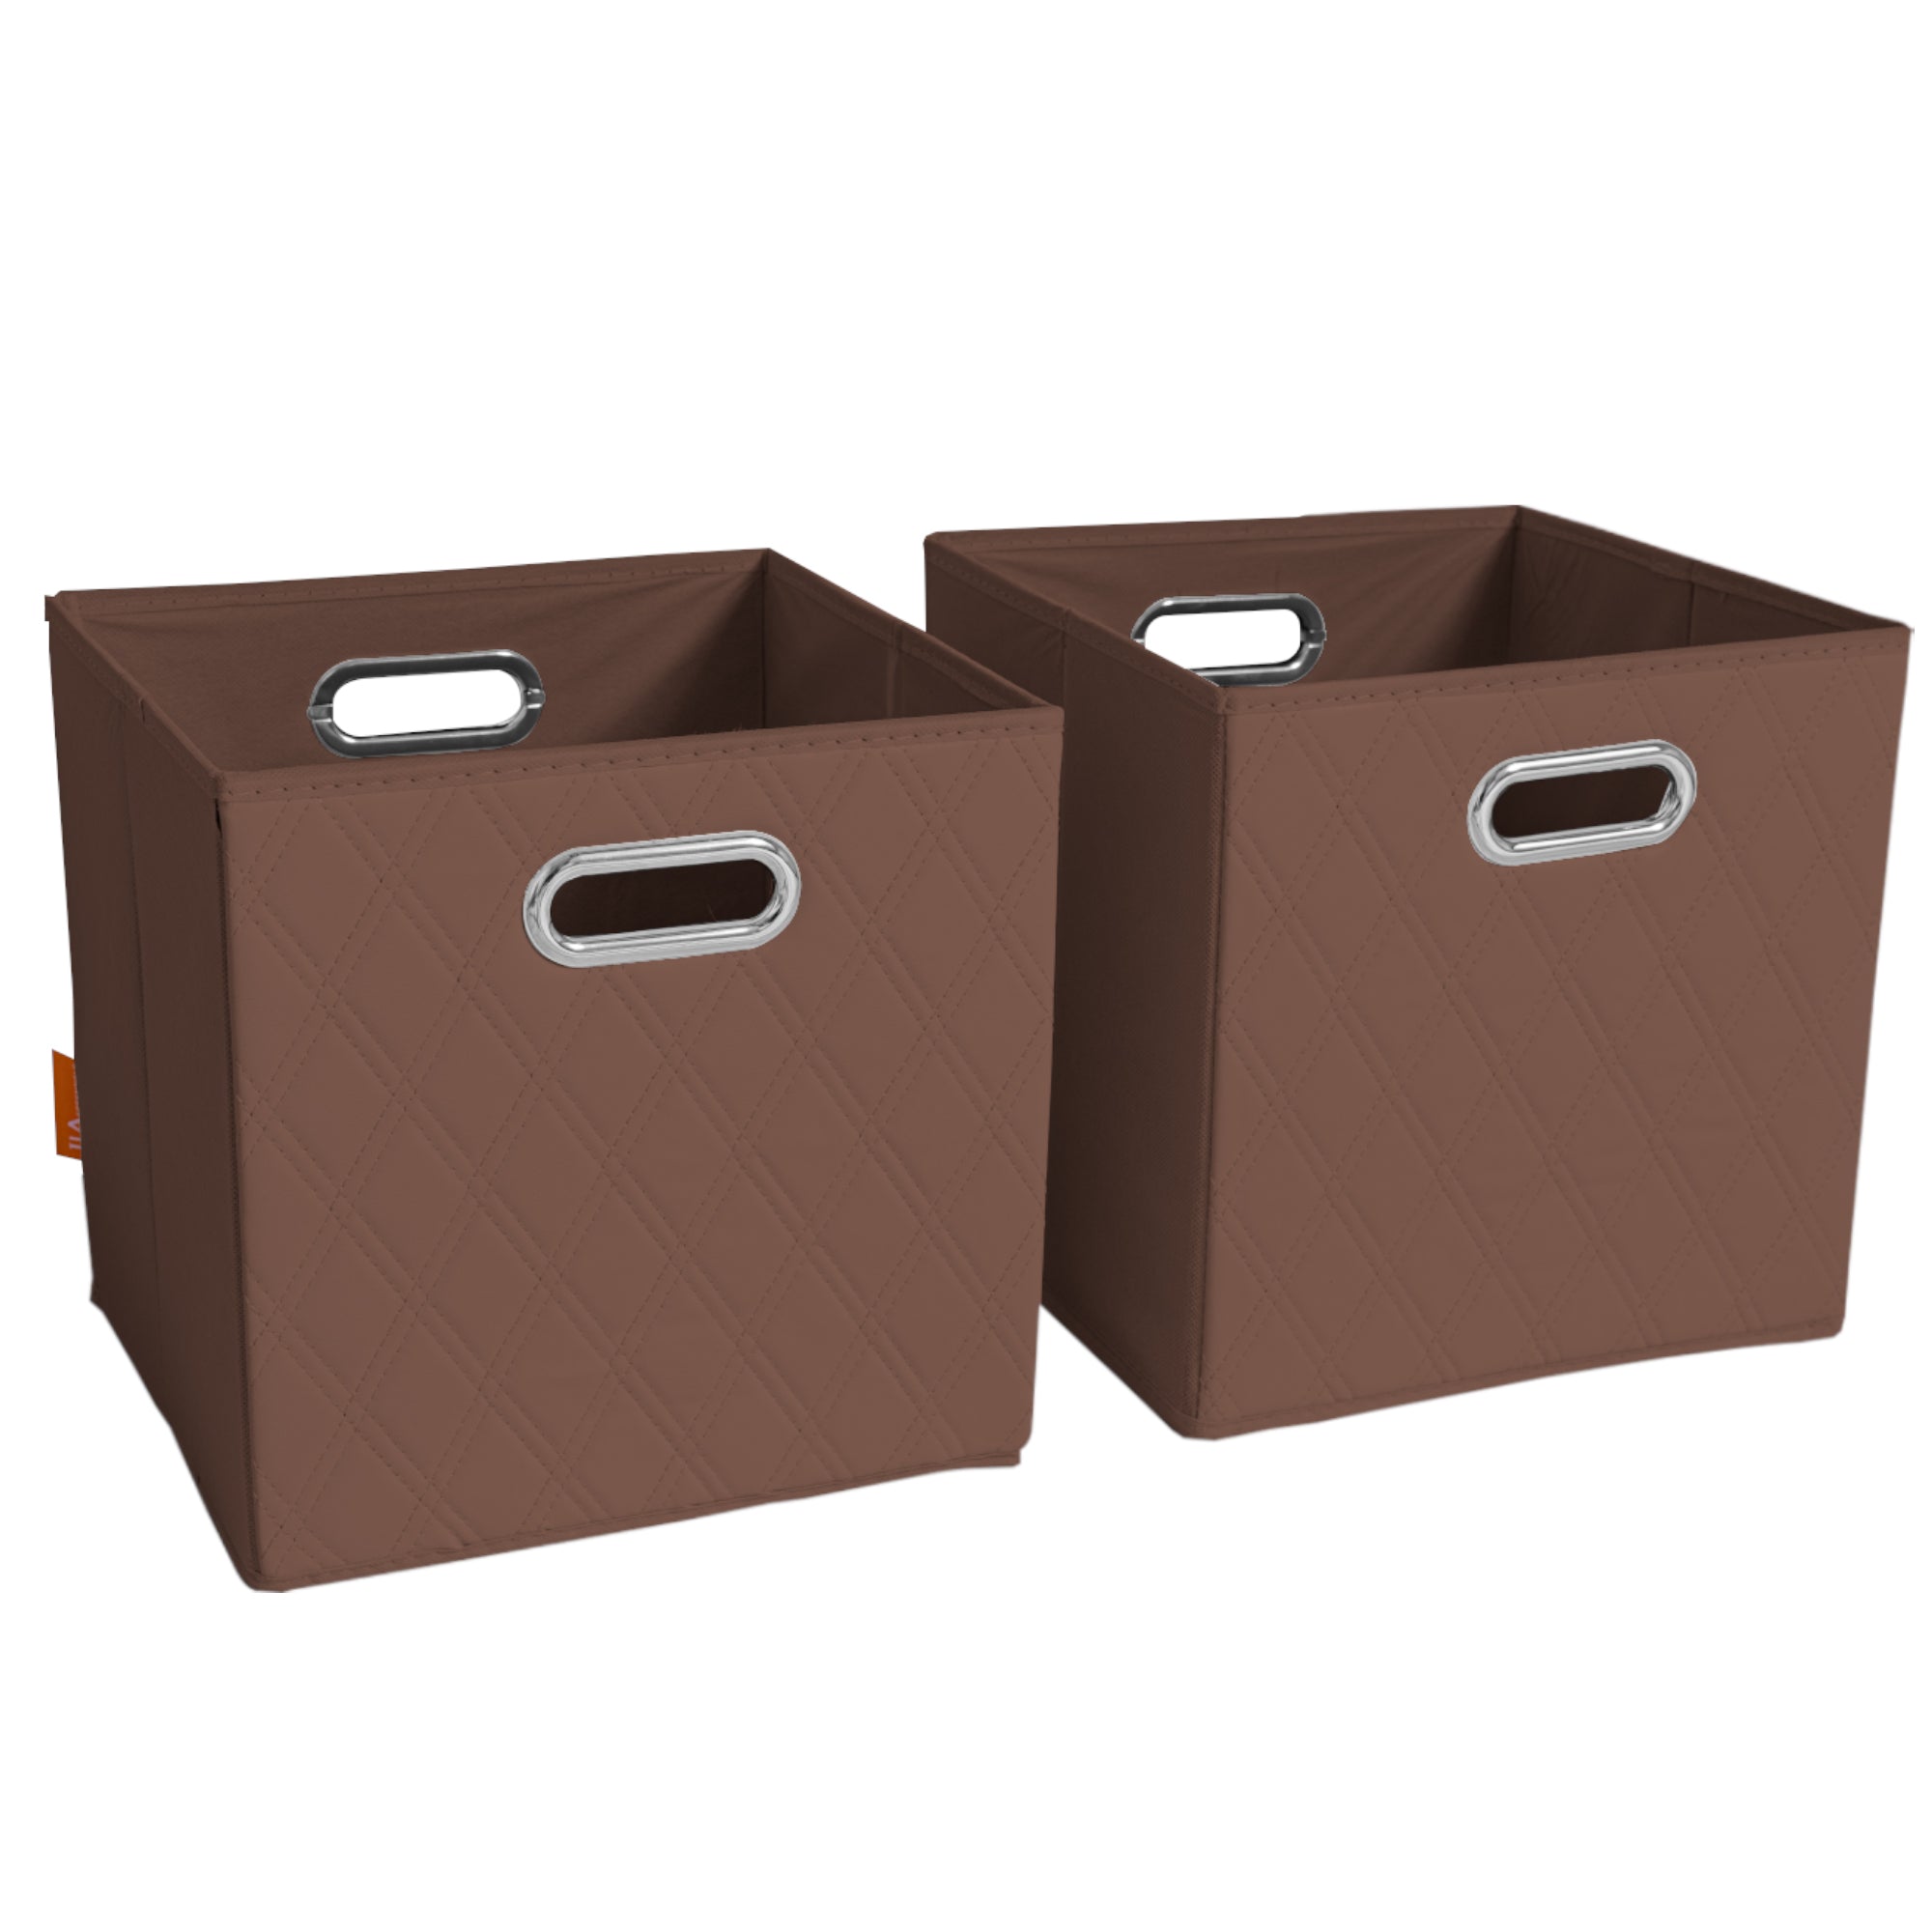 JIAessentials 13 inch Foldable Diamond Patterned Faux Leather Storage Cube Bins Set of Two with Dual Handles - 13" Brown